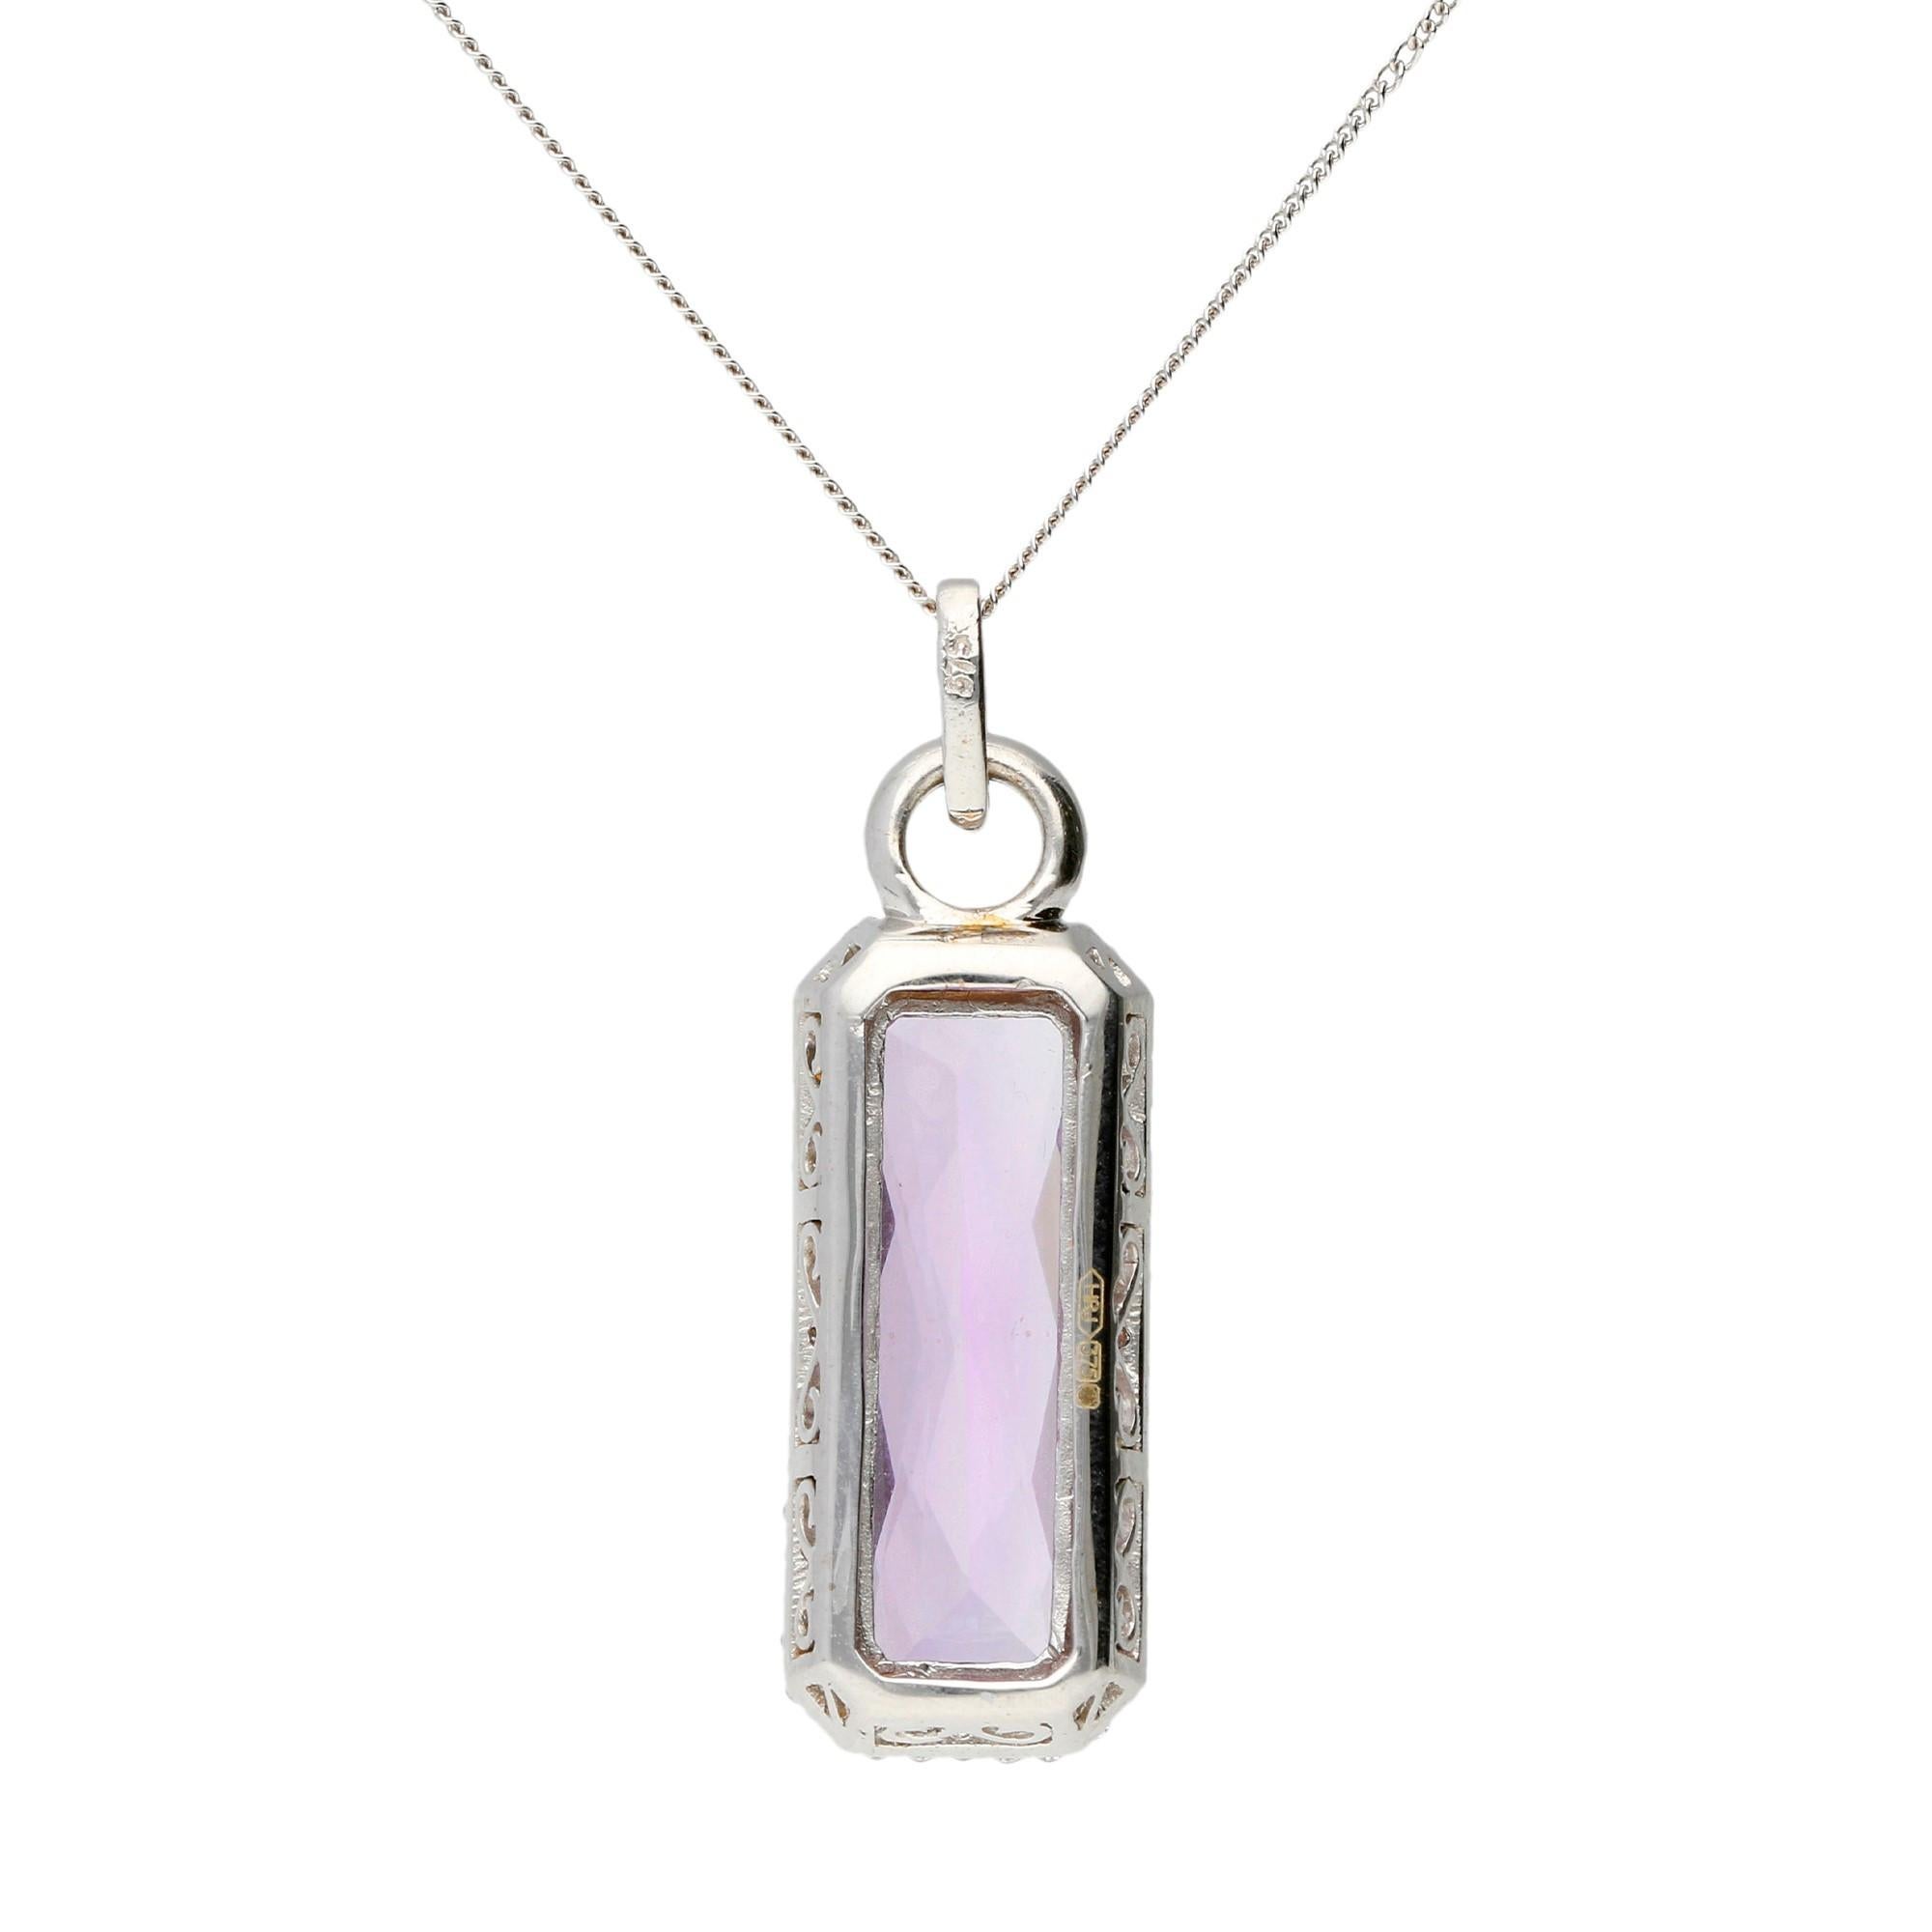 DESCRIPTION
A fabulous February treat! A real showstopping piece that will add a touch of Red Carpet glamour to your wardrobe.

Designed with an impressive amethyst that is framed by sparkling diamonds. An elegant accessory, that's perfect for an